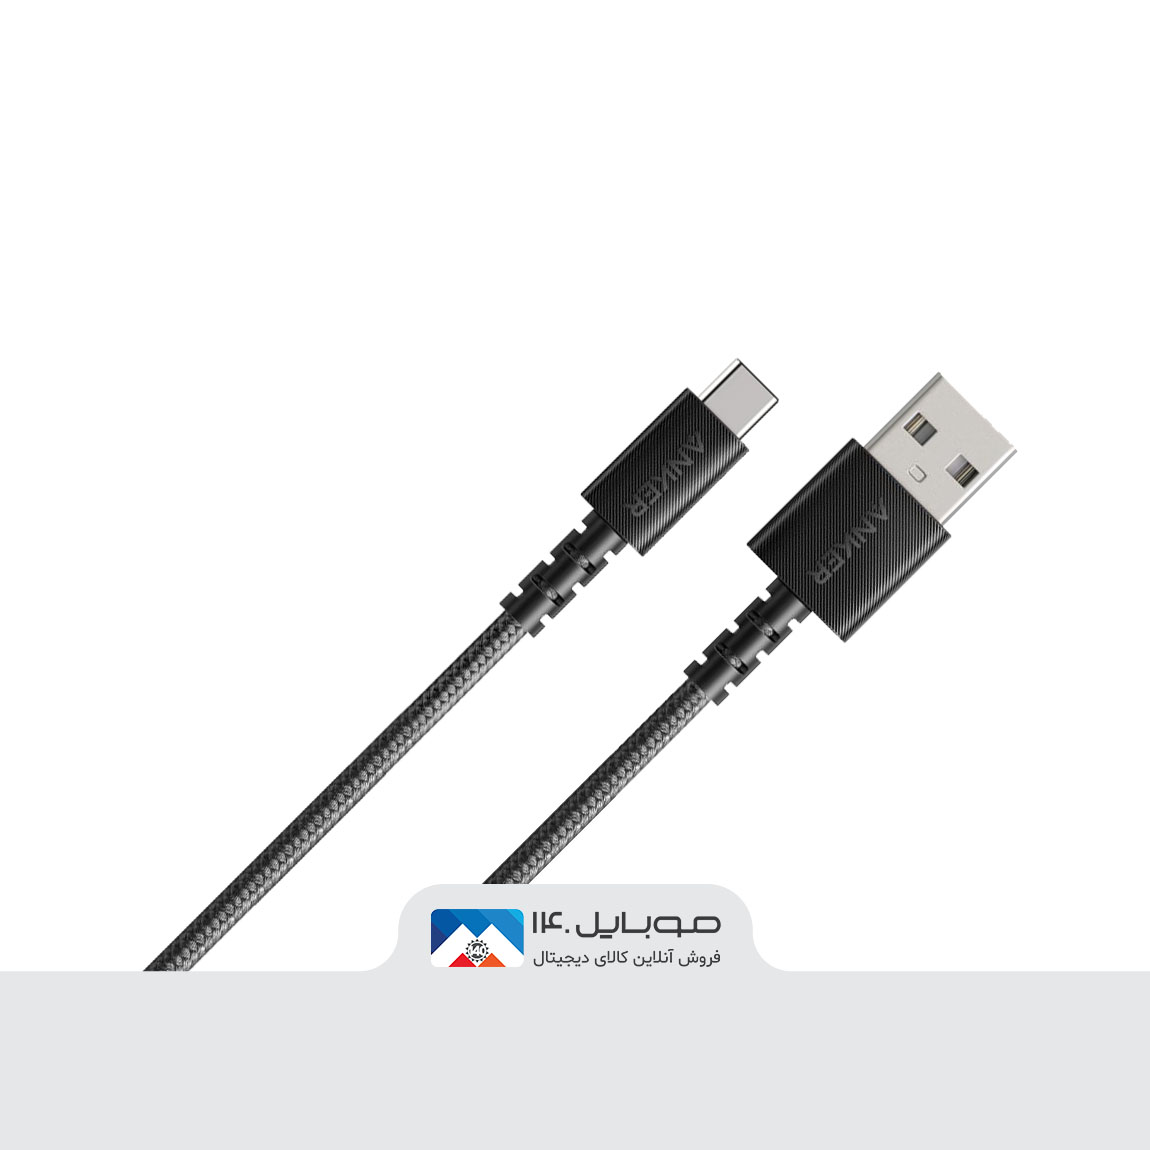 Anker A8023 USB To USB-C Cable 1